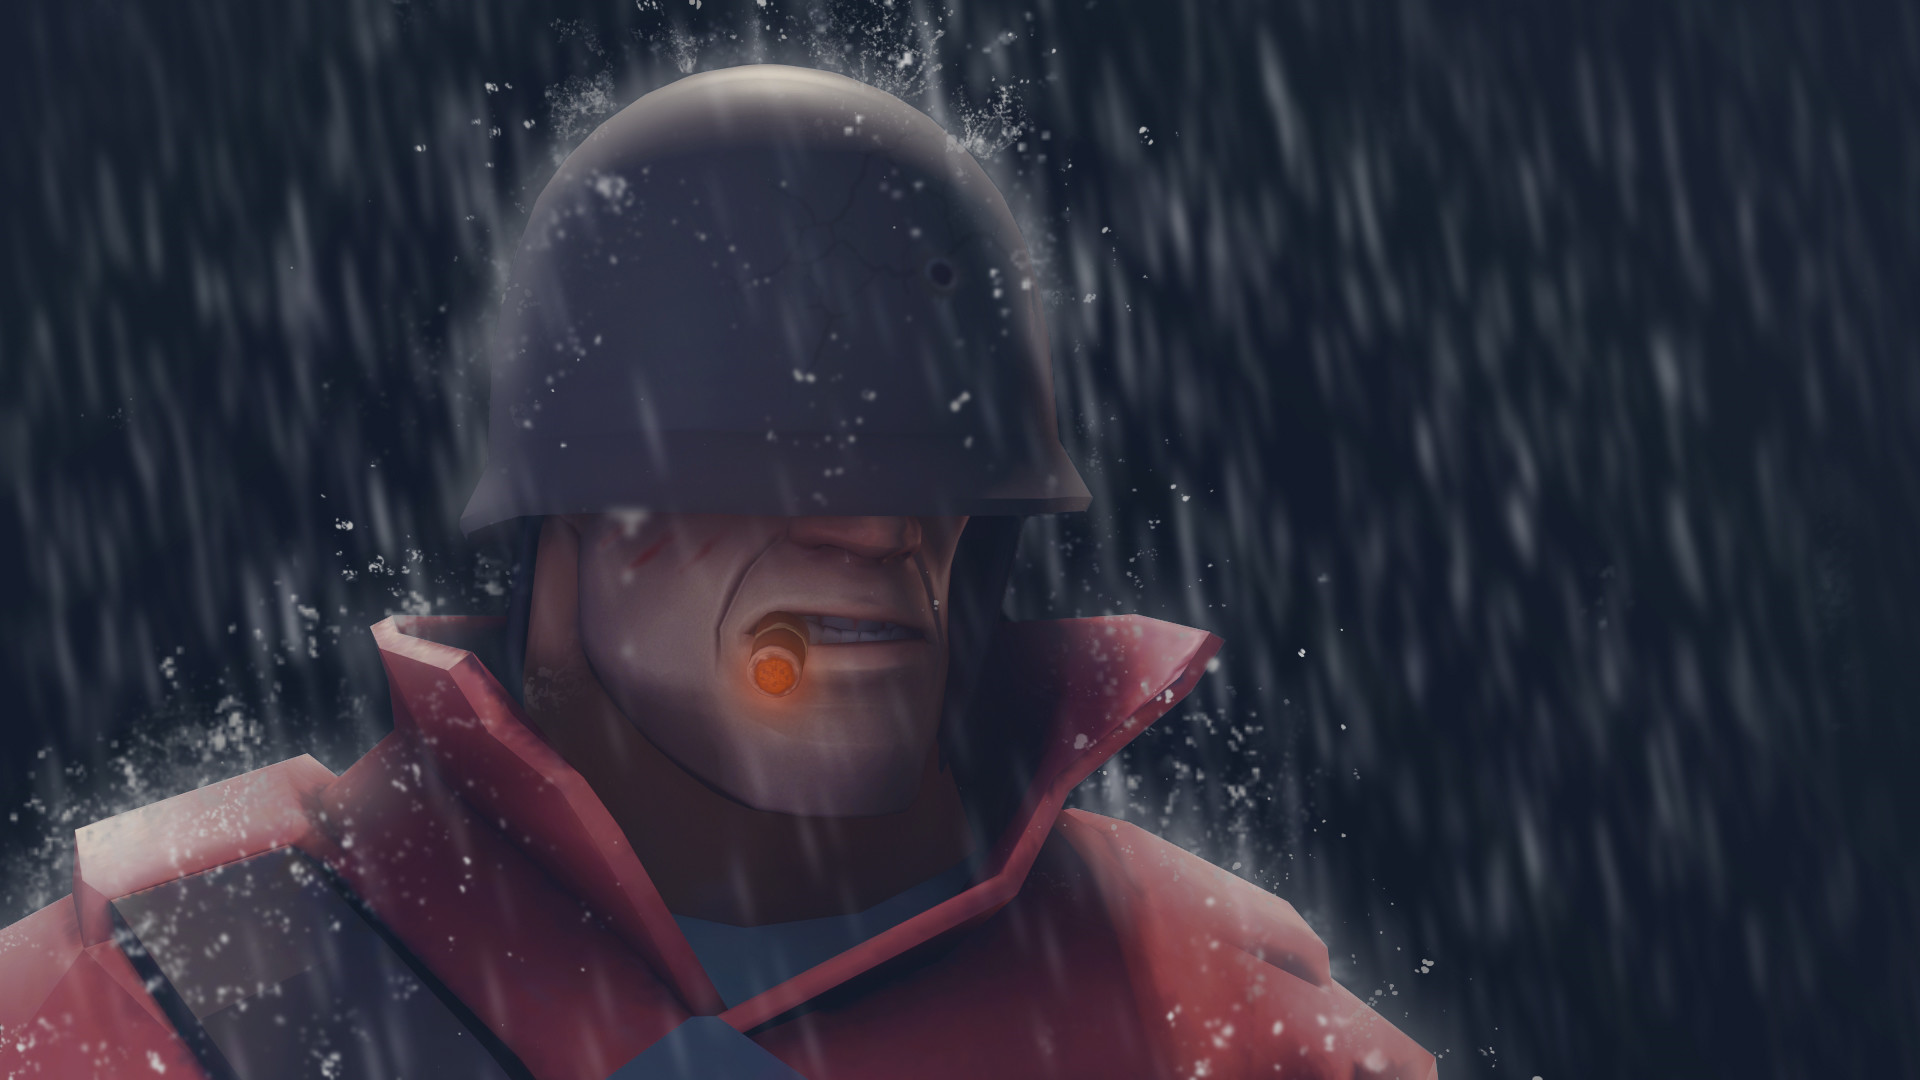 1920x1080 Soldier in the rain, SFM and PhotoshopCreation ...